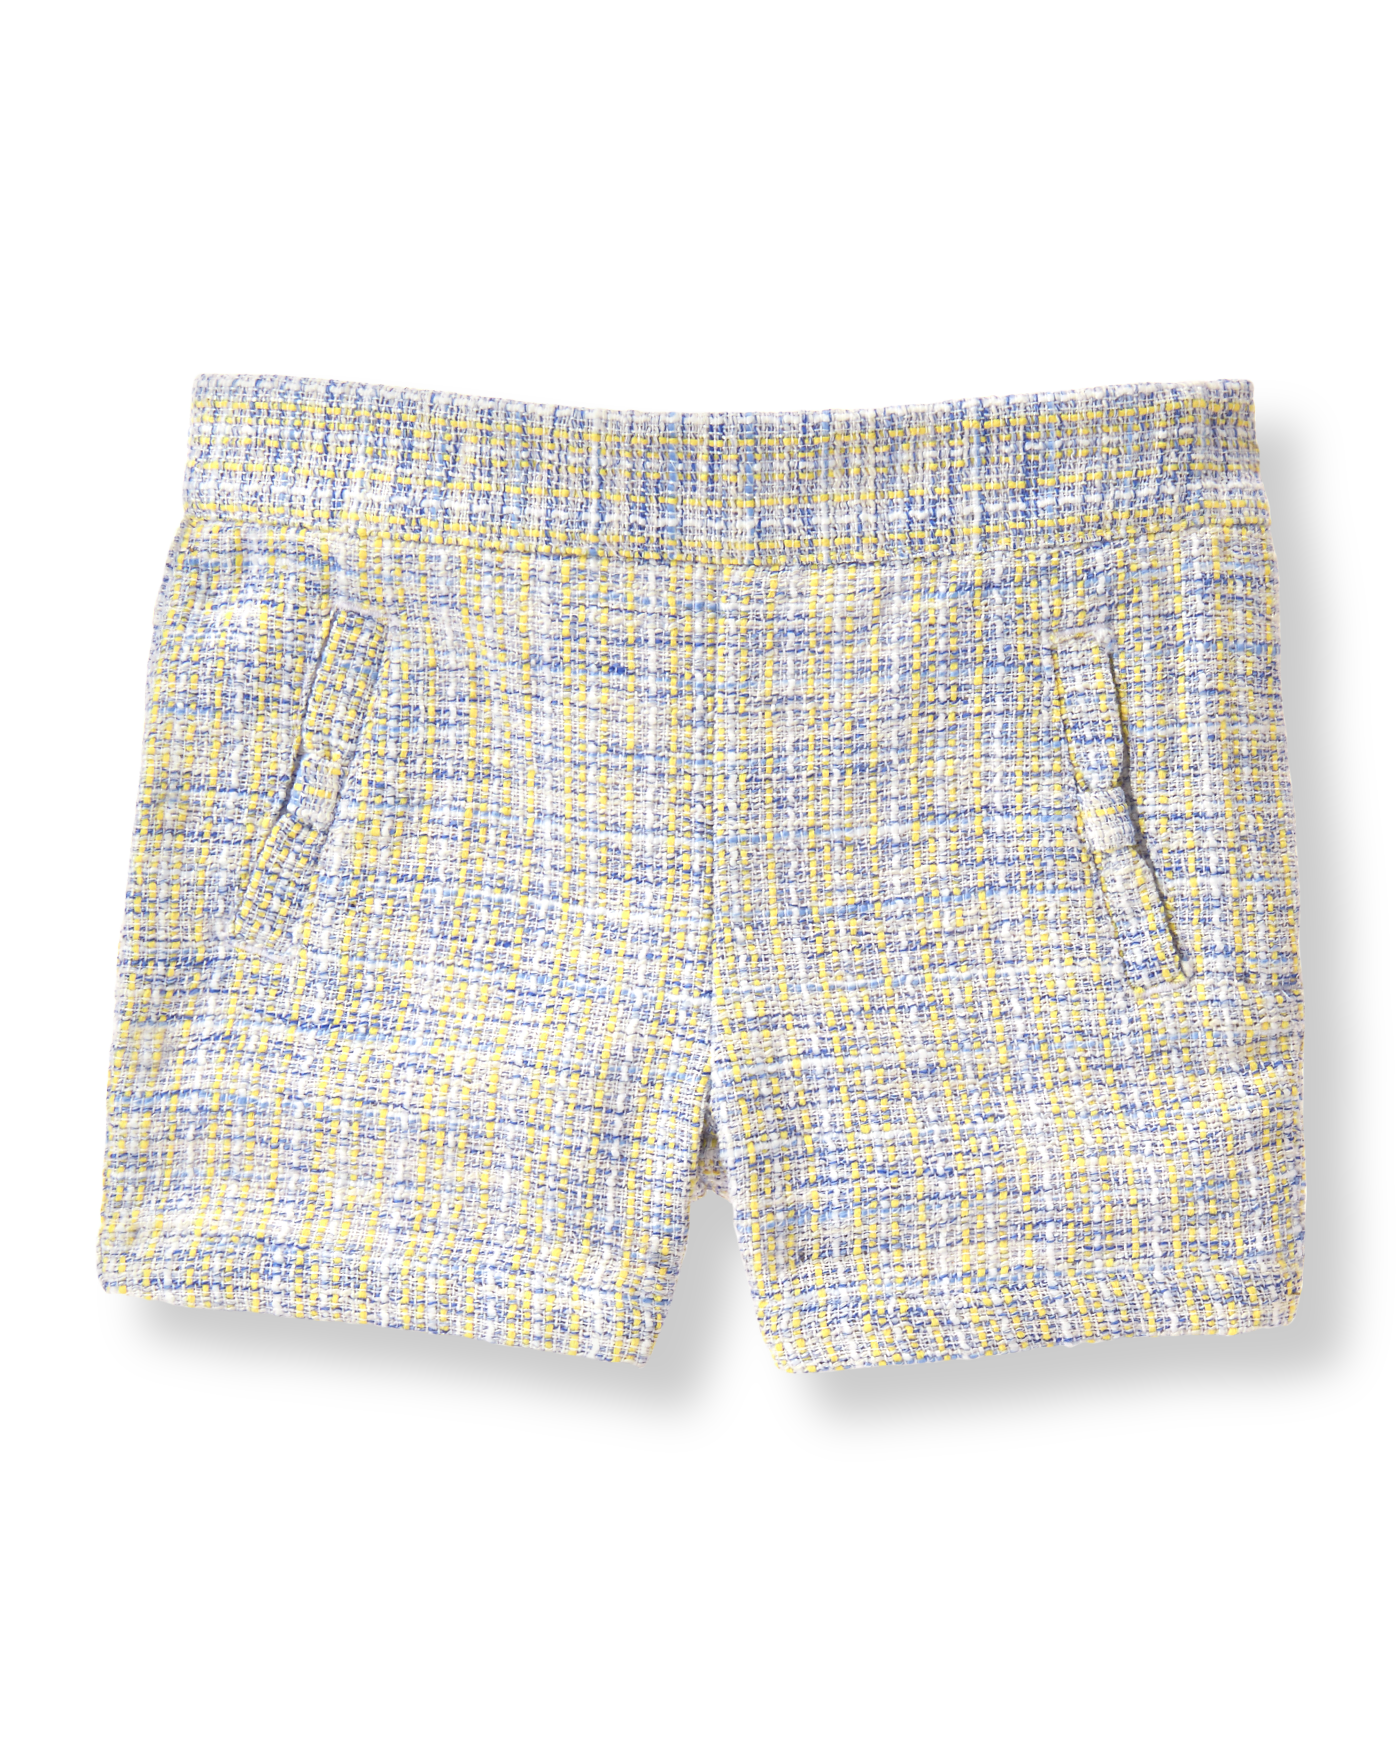 Girls Shorts at Janie and Jack